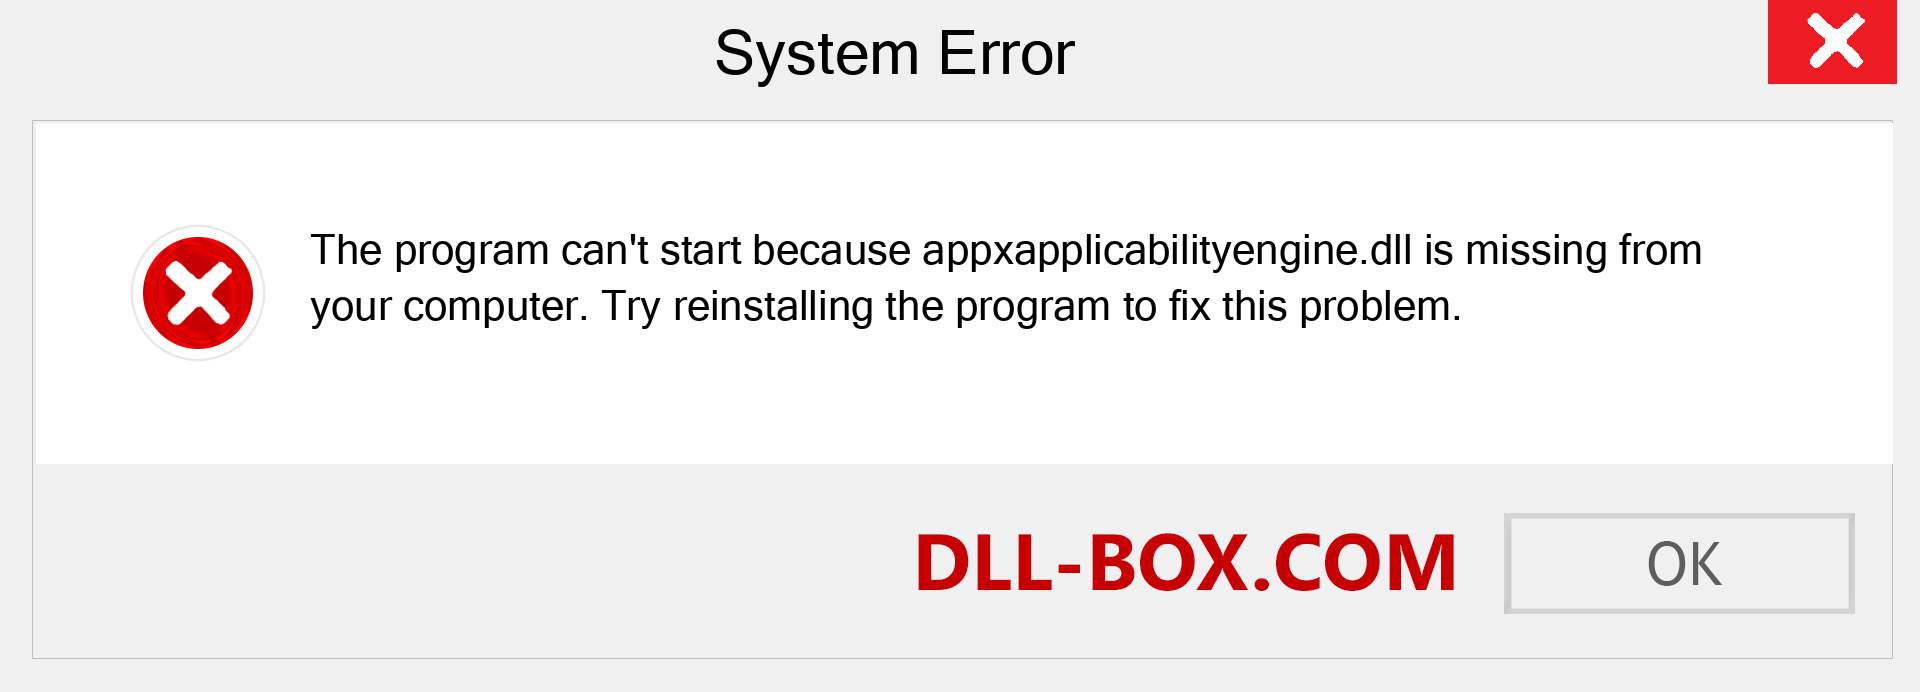  appxapplicabilityengine.dll file is missing?. Download for Windows 7, 8, 10 - Fix  appxapplicabilityengine dll Missing Error on Windows, photos, images